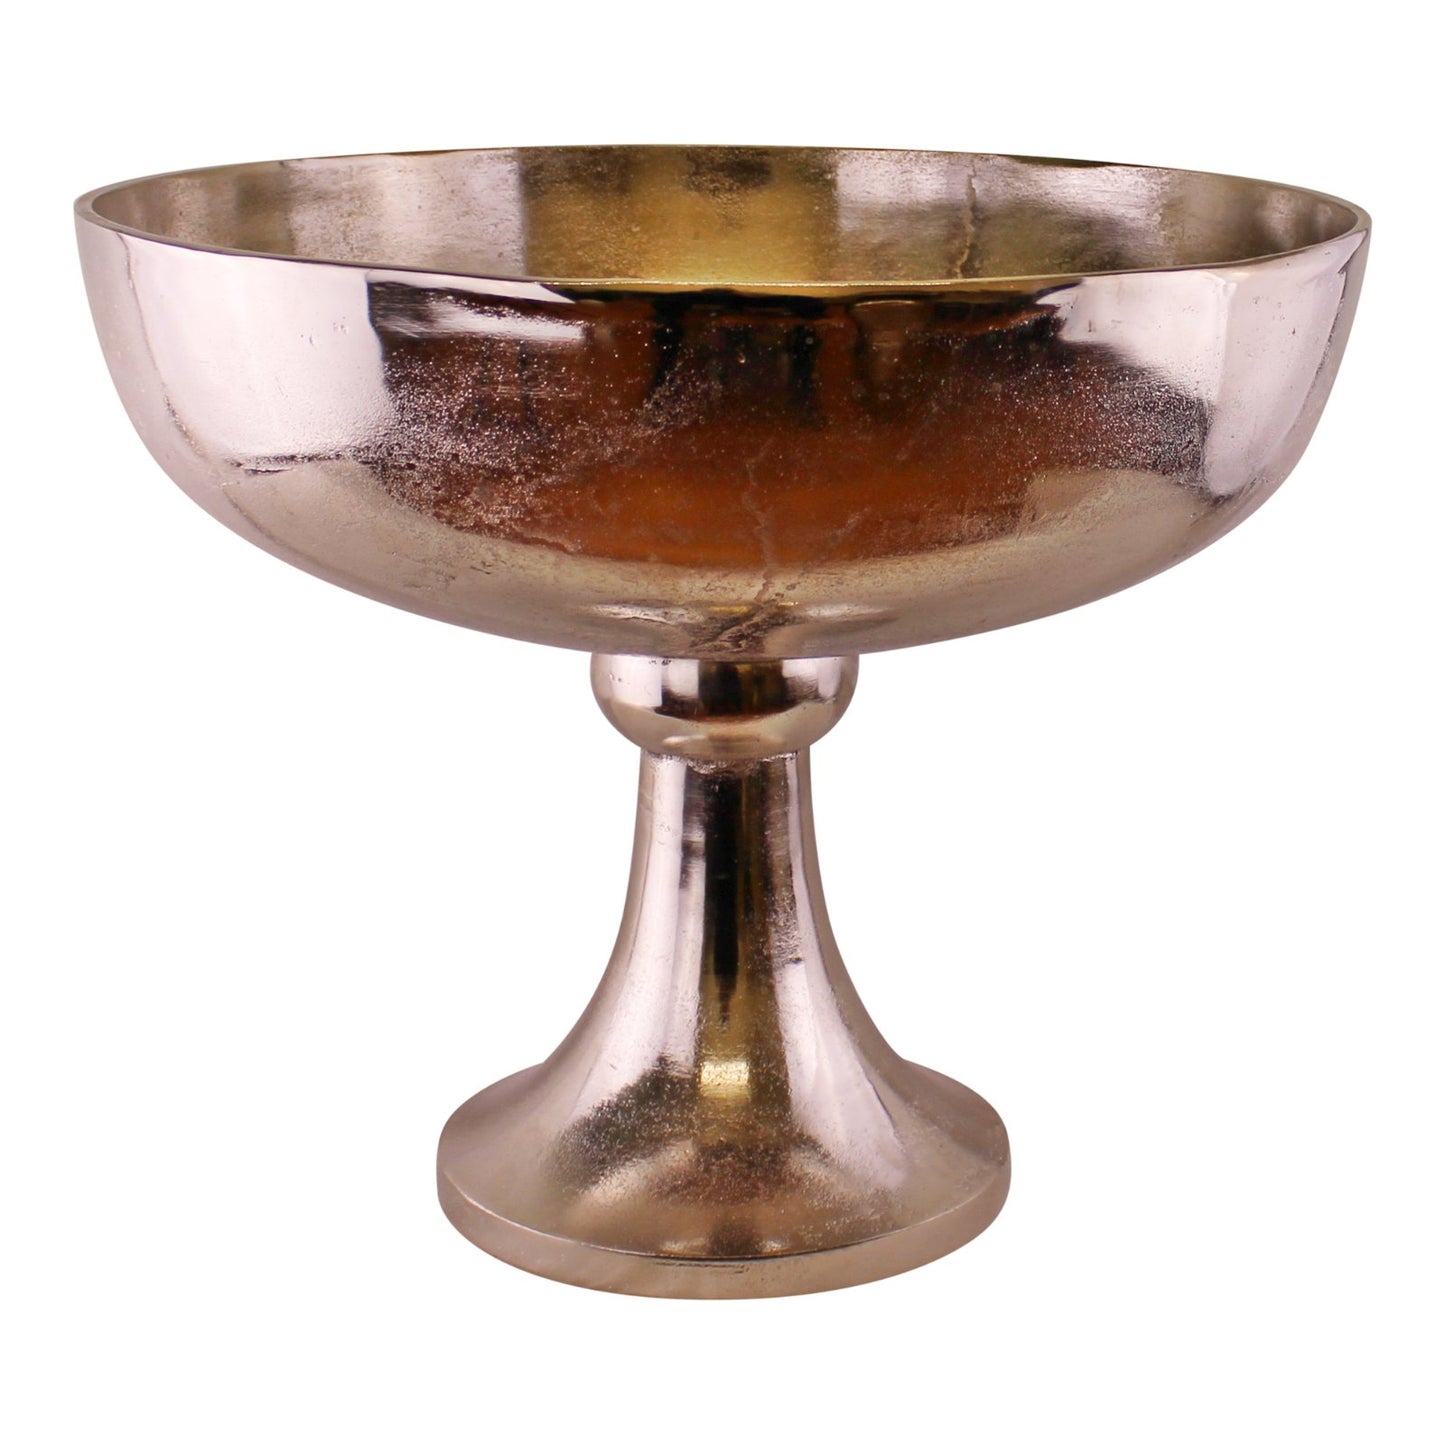 Silver Metal Bowl On Stand, 42x35cm